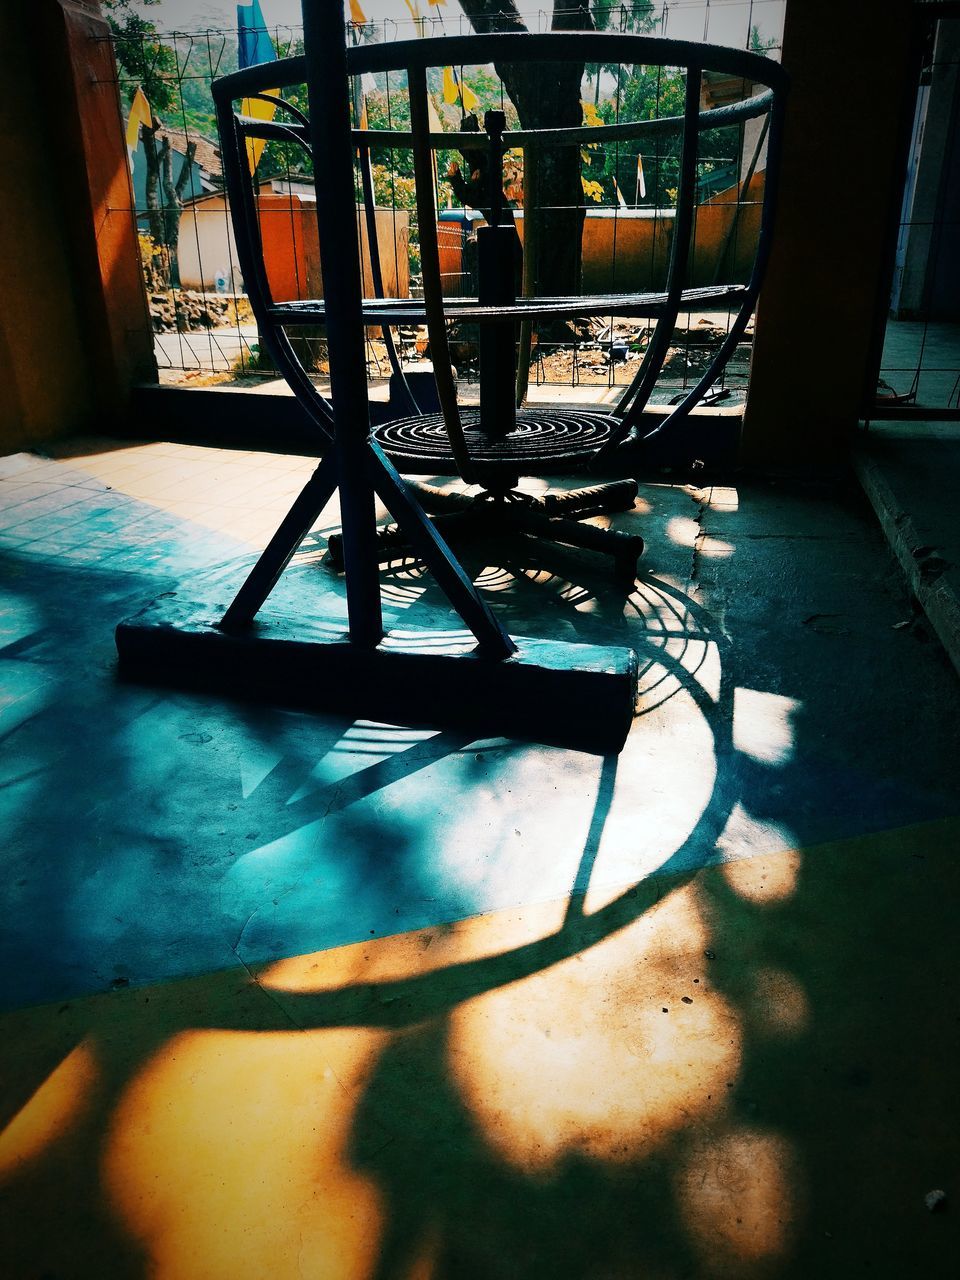 EMPTY CHAIRS AND TABLE IN SUNLIGHT